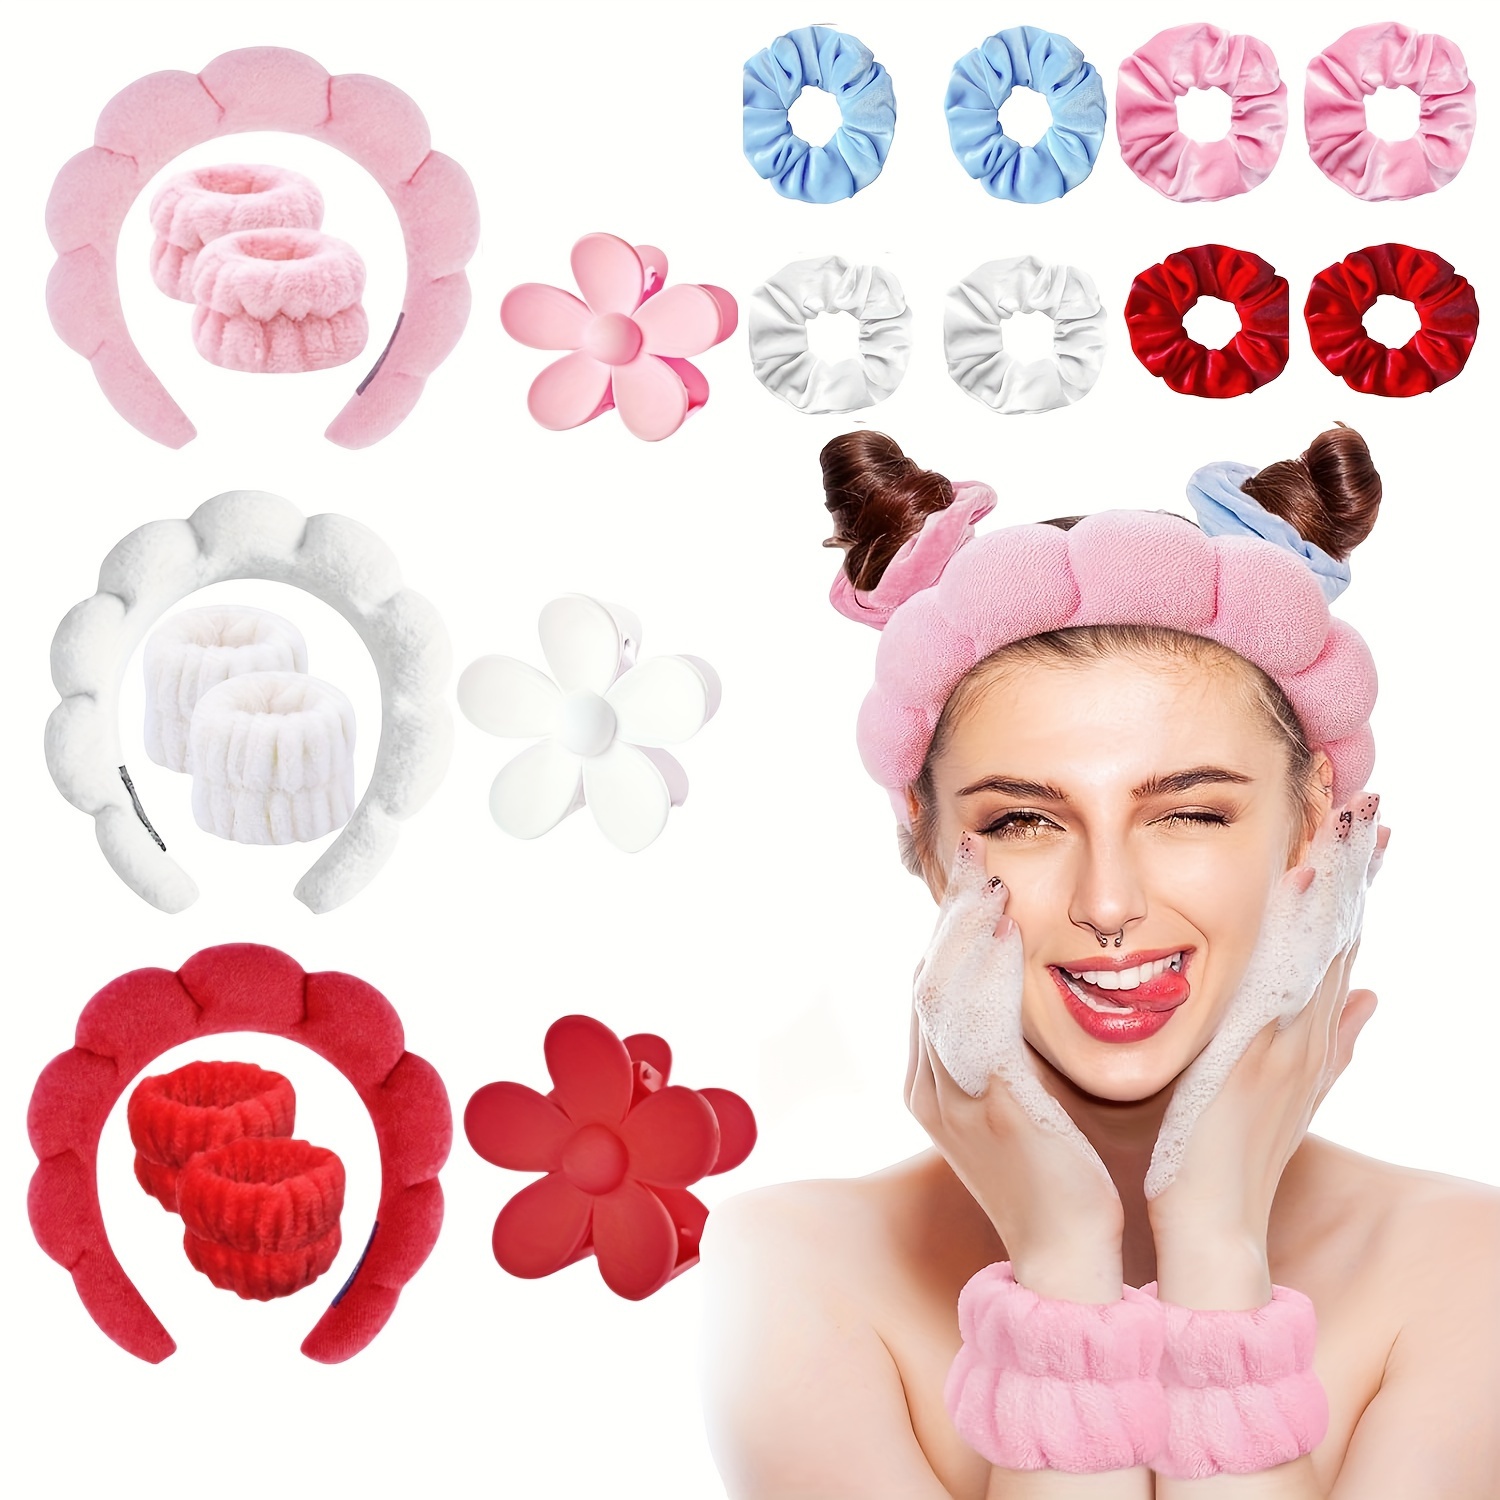 

6pcs Solid Color Hair Accessories Kit Cloud Shaped Head Band Elastic Wrist Band Flower Shaped Hair Claw Clip Large Intestine Hair Loop For Women And Daily Uses